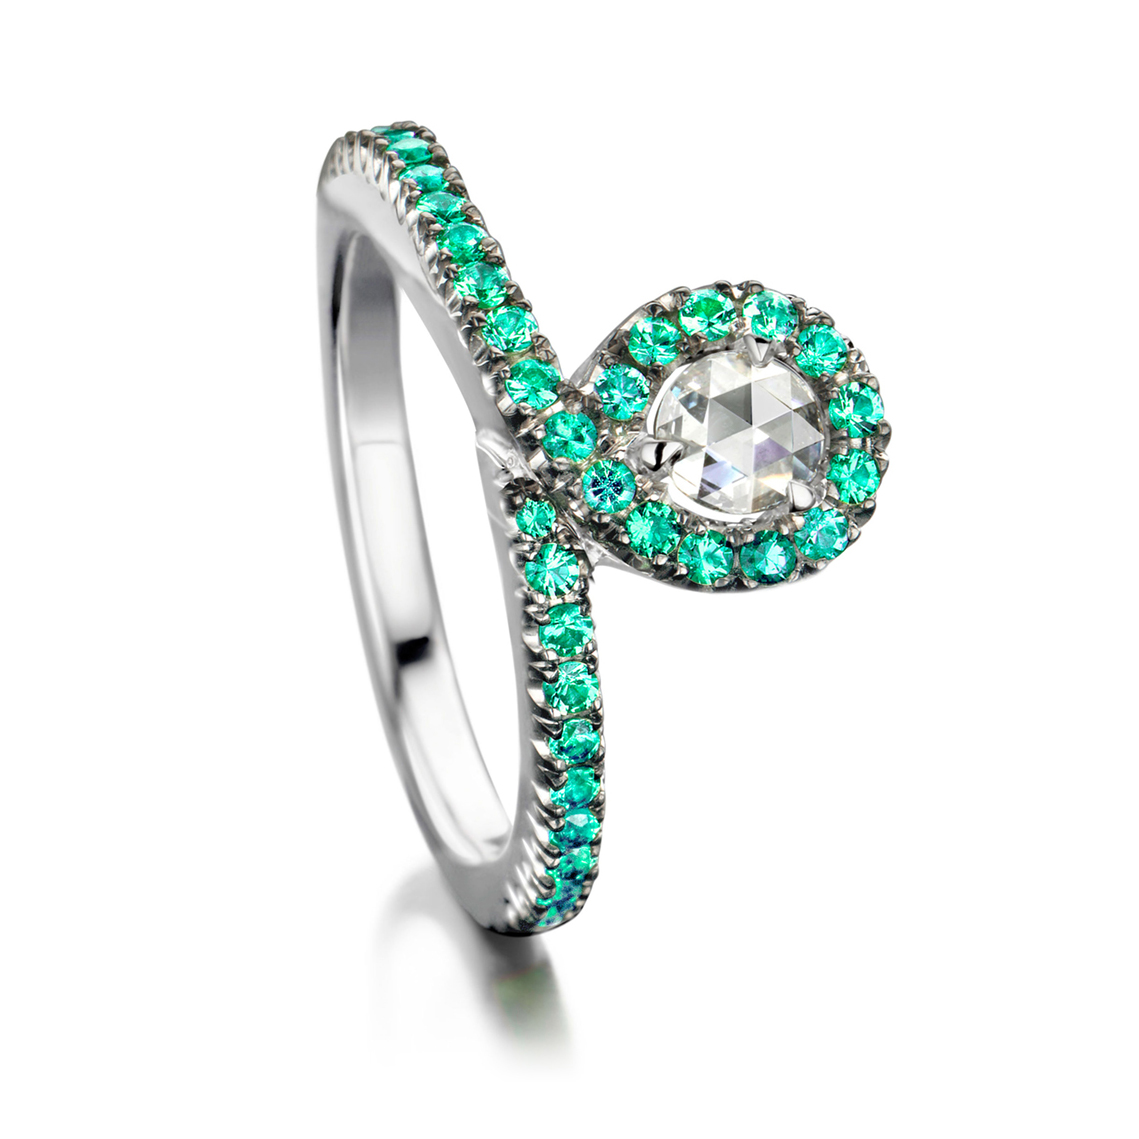 Ring in 18 karat white gold set with a white rose-cut diamond centerstone and top quality emeralds in castle setting.